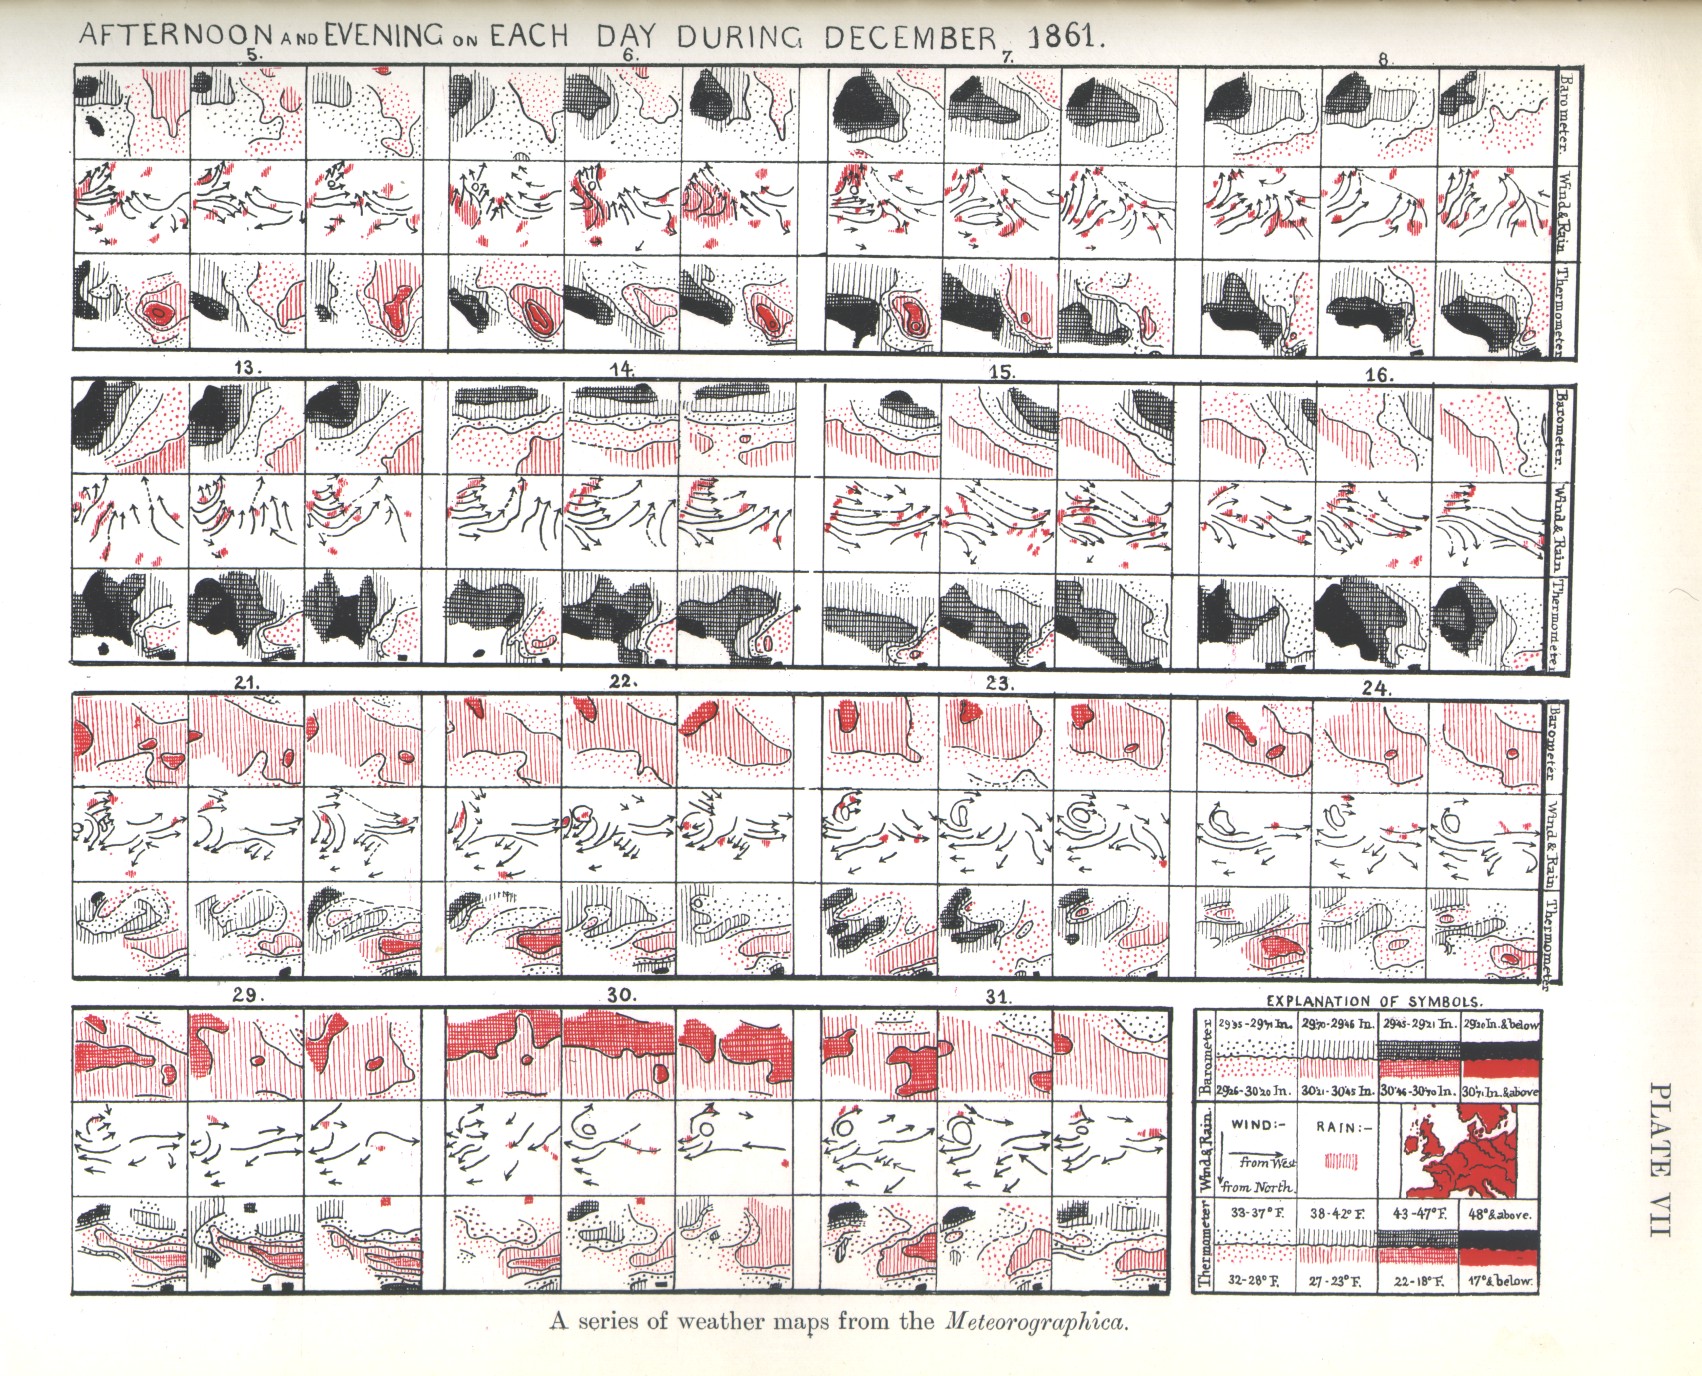 Multivariate schematic mini-maps: Francis Galton, “Charts of the Thermometer, Wind, Rain and Barometer on the Morning, Afternoon and Evening on Each Day during December 1861.” Each daily panel is a 3x3 display of the combinations of barometric pressure, wind and rain and temperature by morning, noon and afternoon.